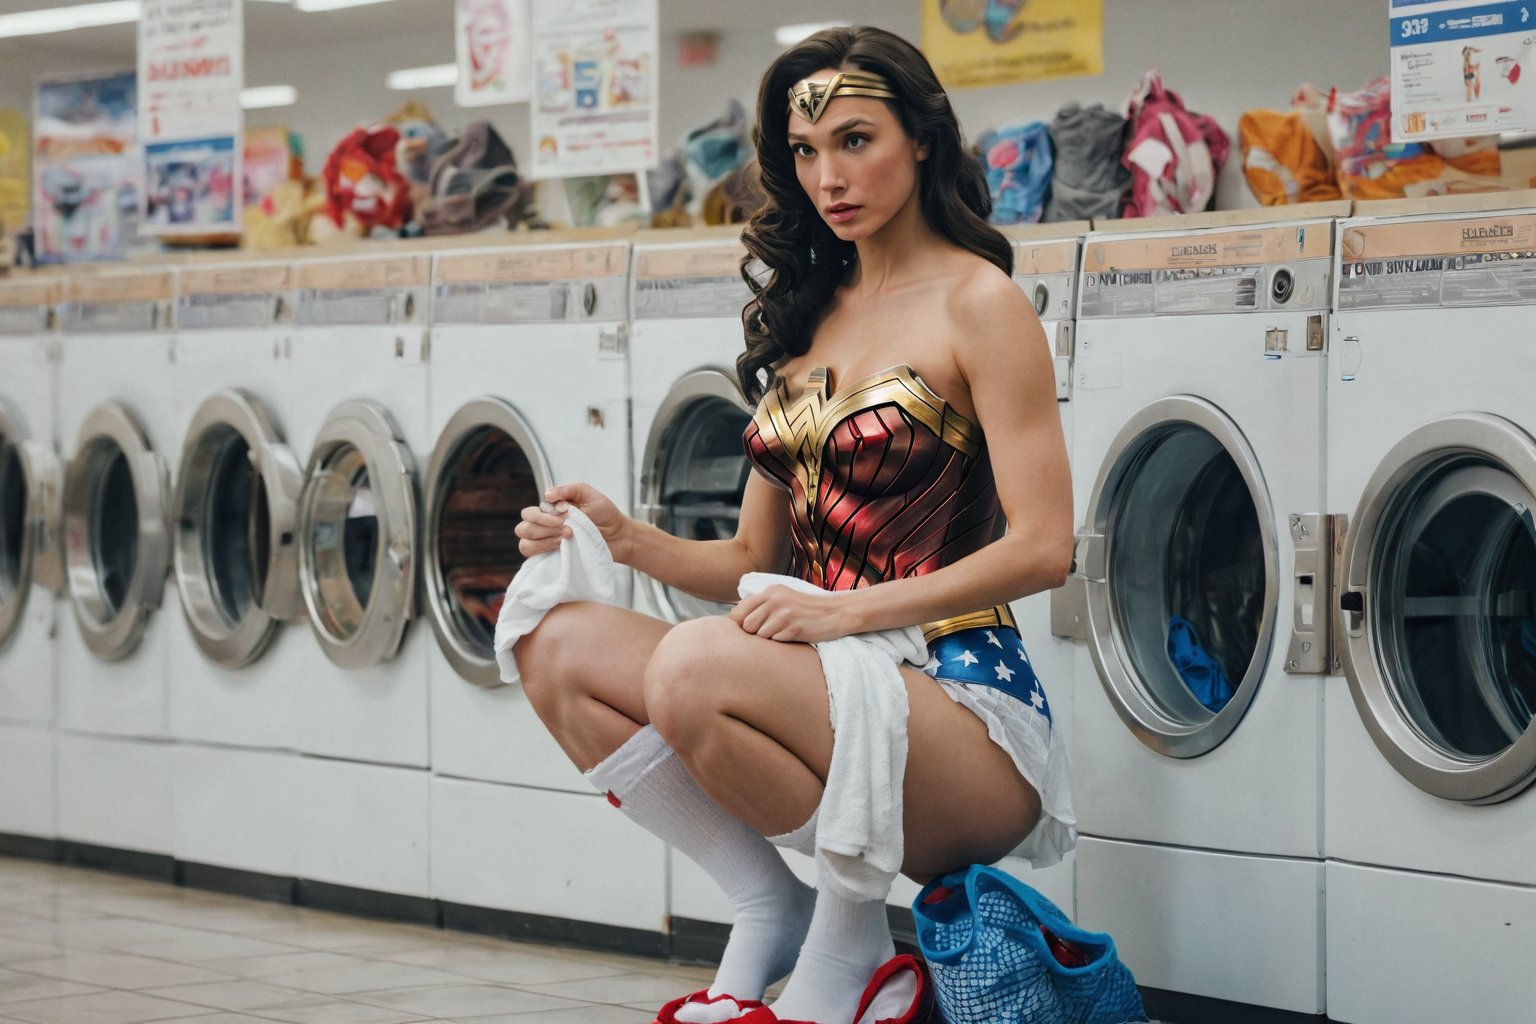 Photo of Wonder Woman, wearing white bras and  underwear and socks, waiting for her laundry to be done at a Laundromat.  The background have people talking and tending to their laundry.